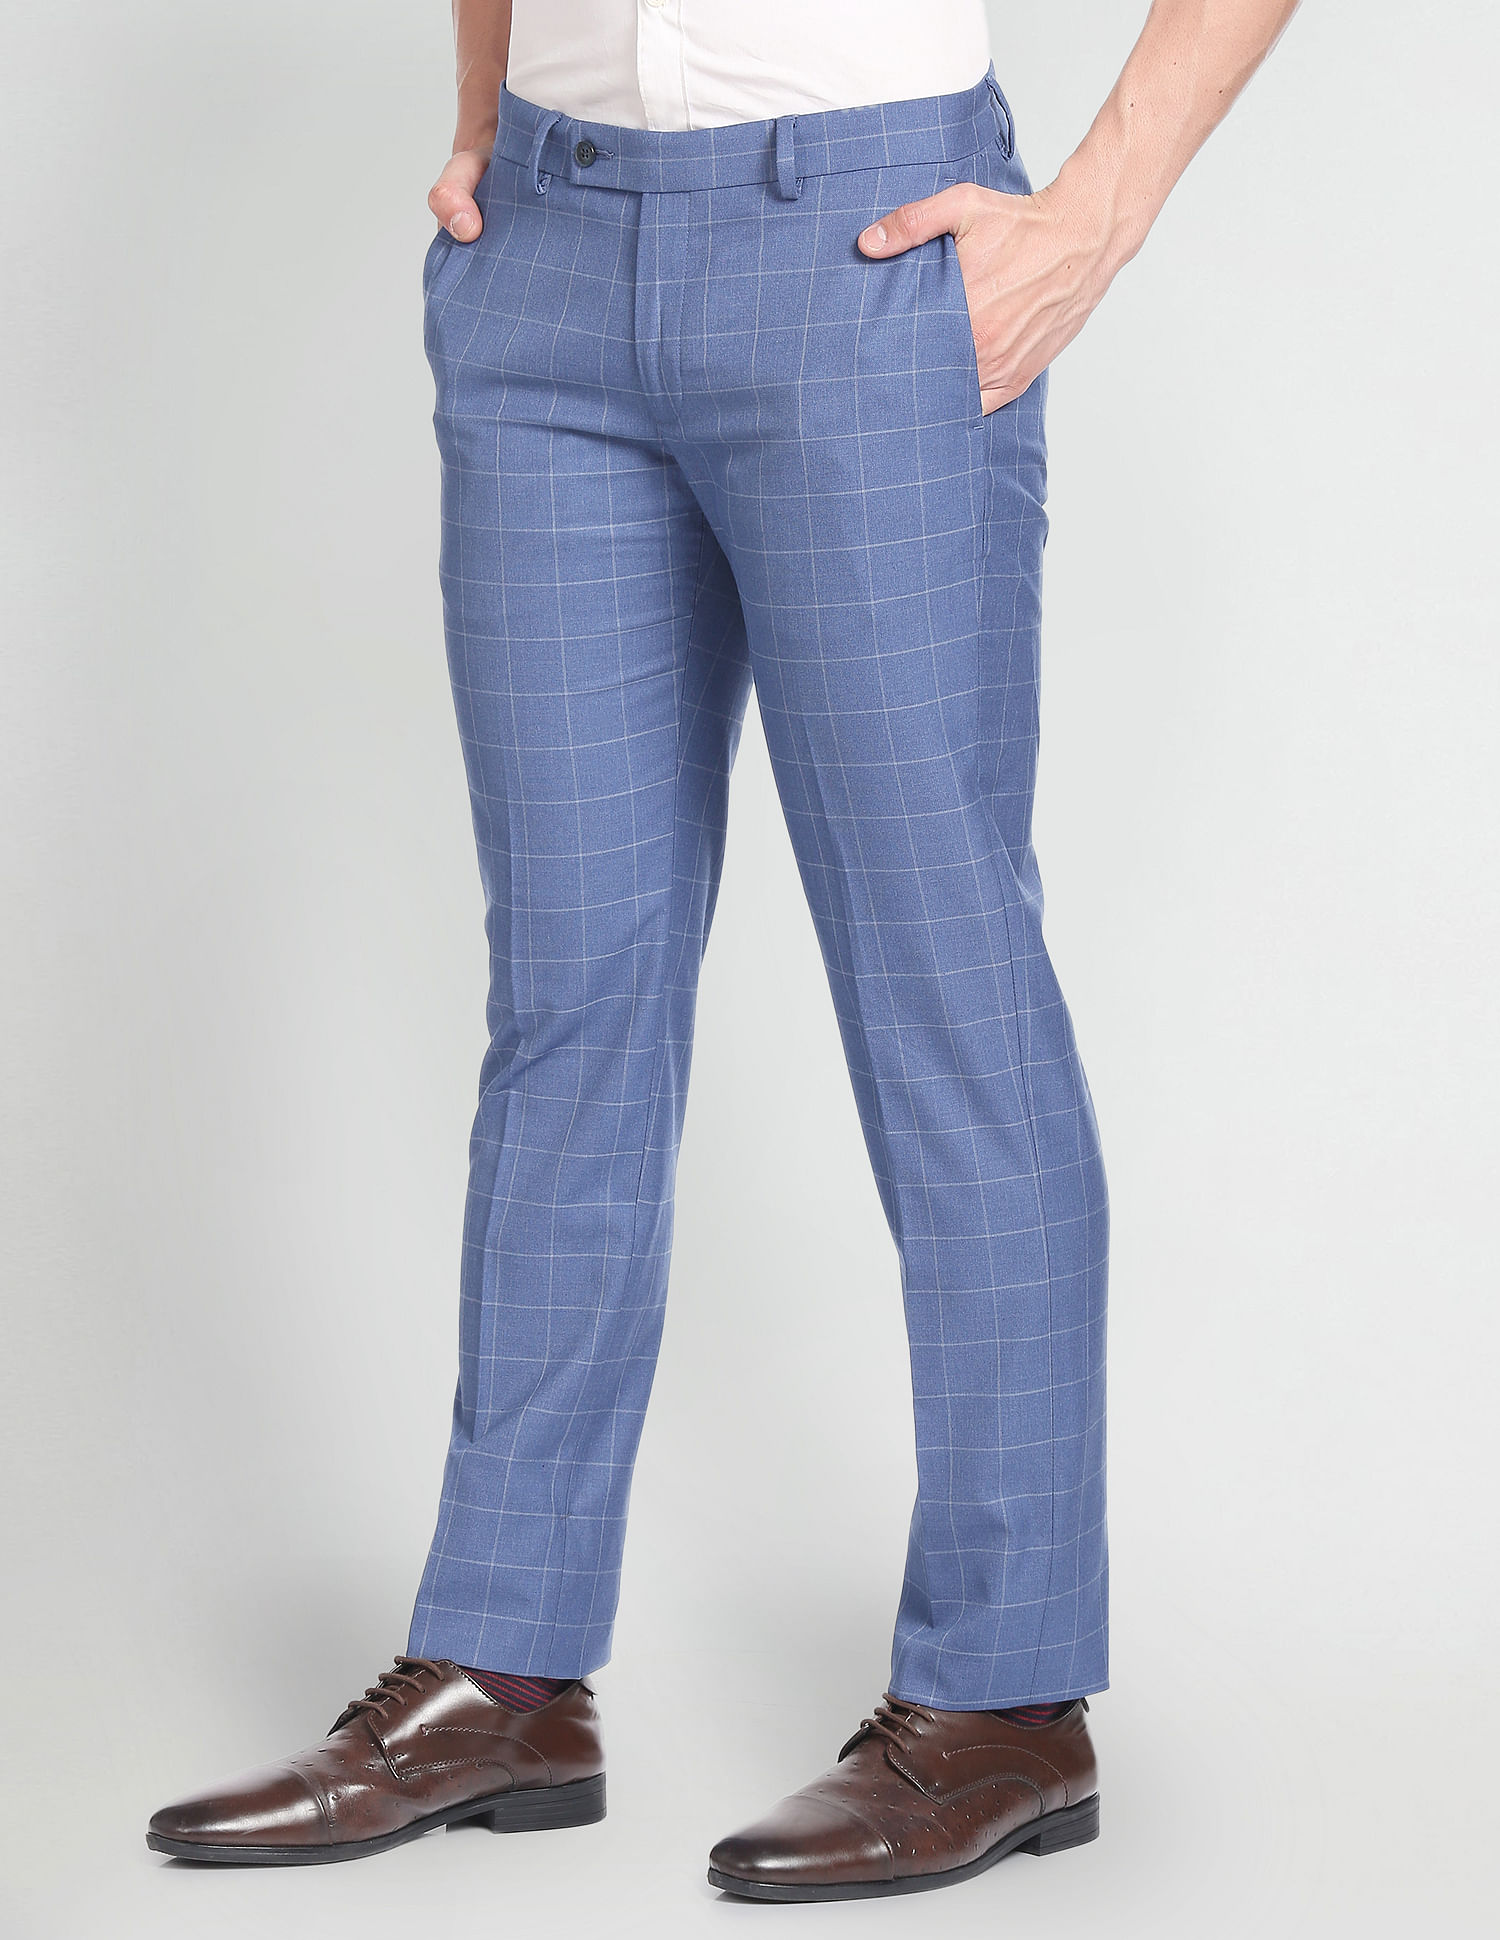 Antique Rogue | Grey & Blue Checked Trousers | SuitDirect.co.uk